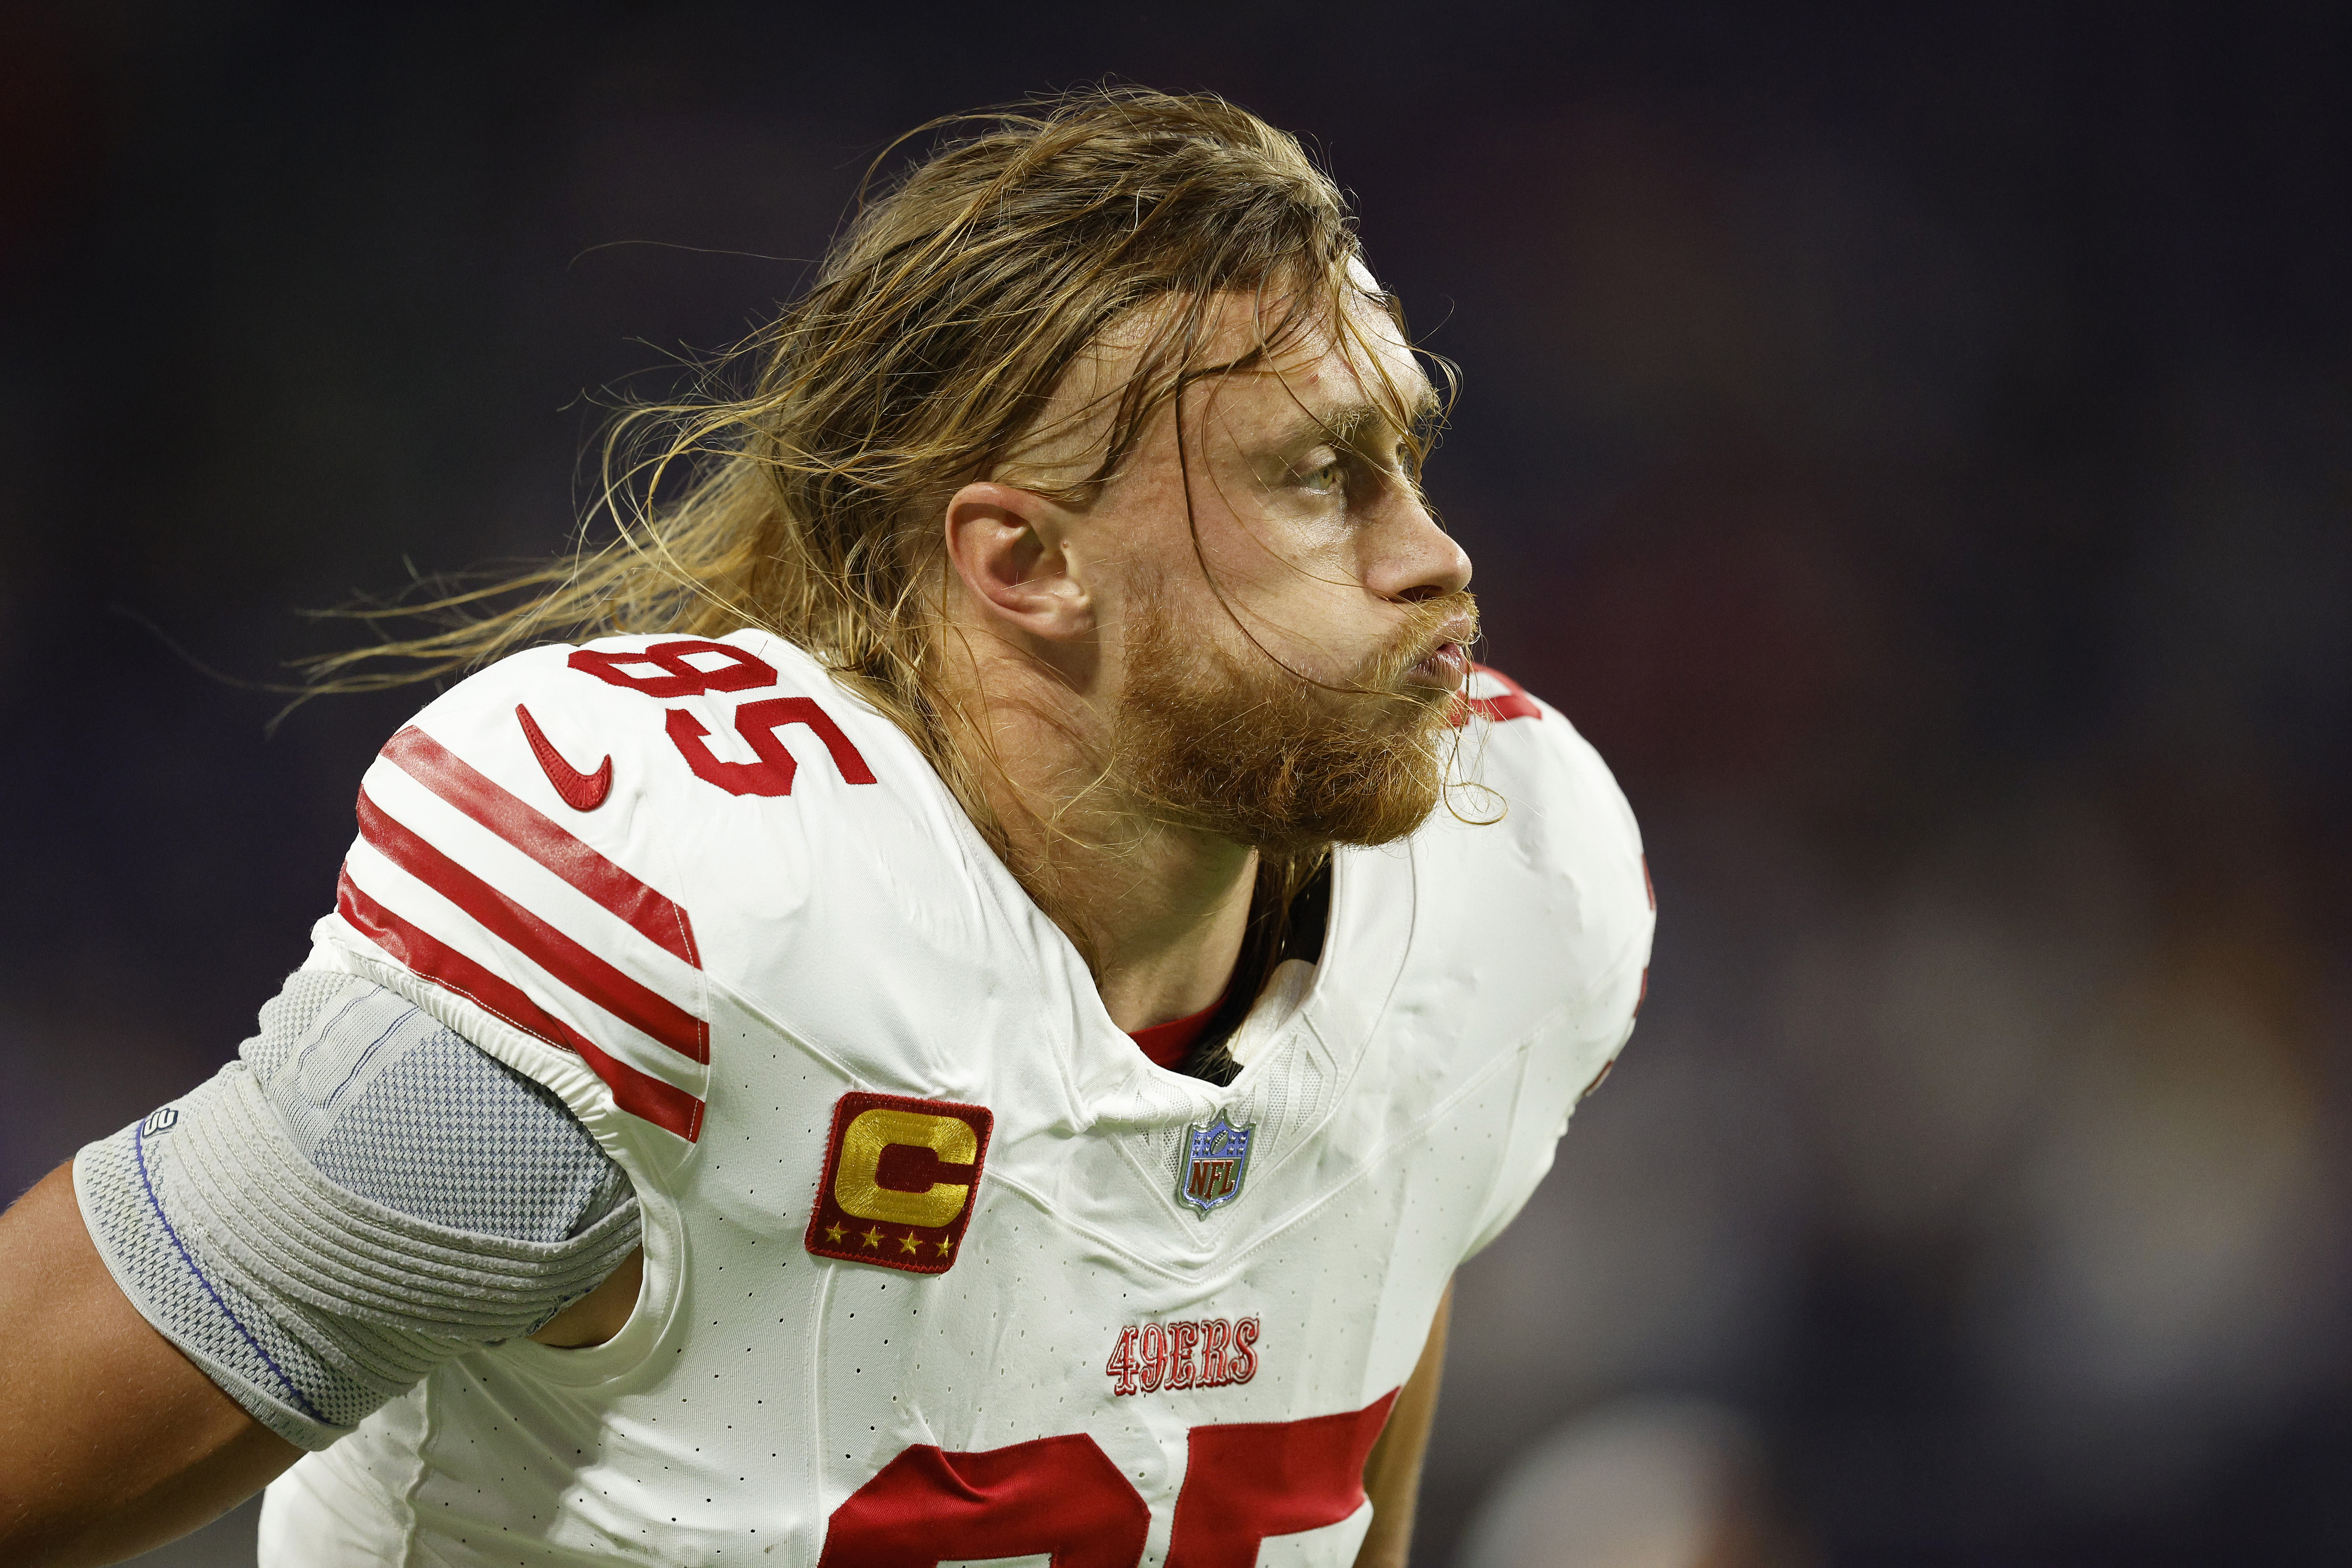 NFL fans are just realizing George Kittle wore x-rated jersey